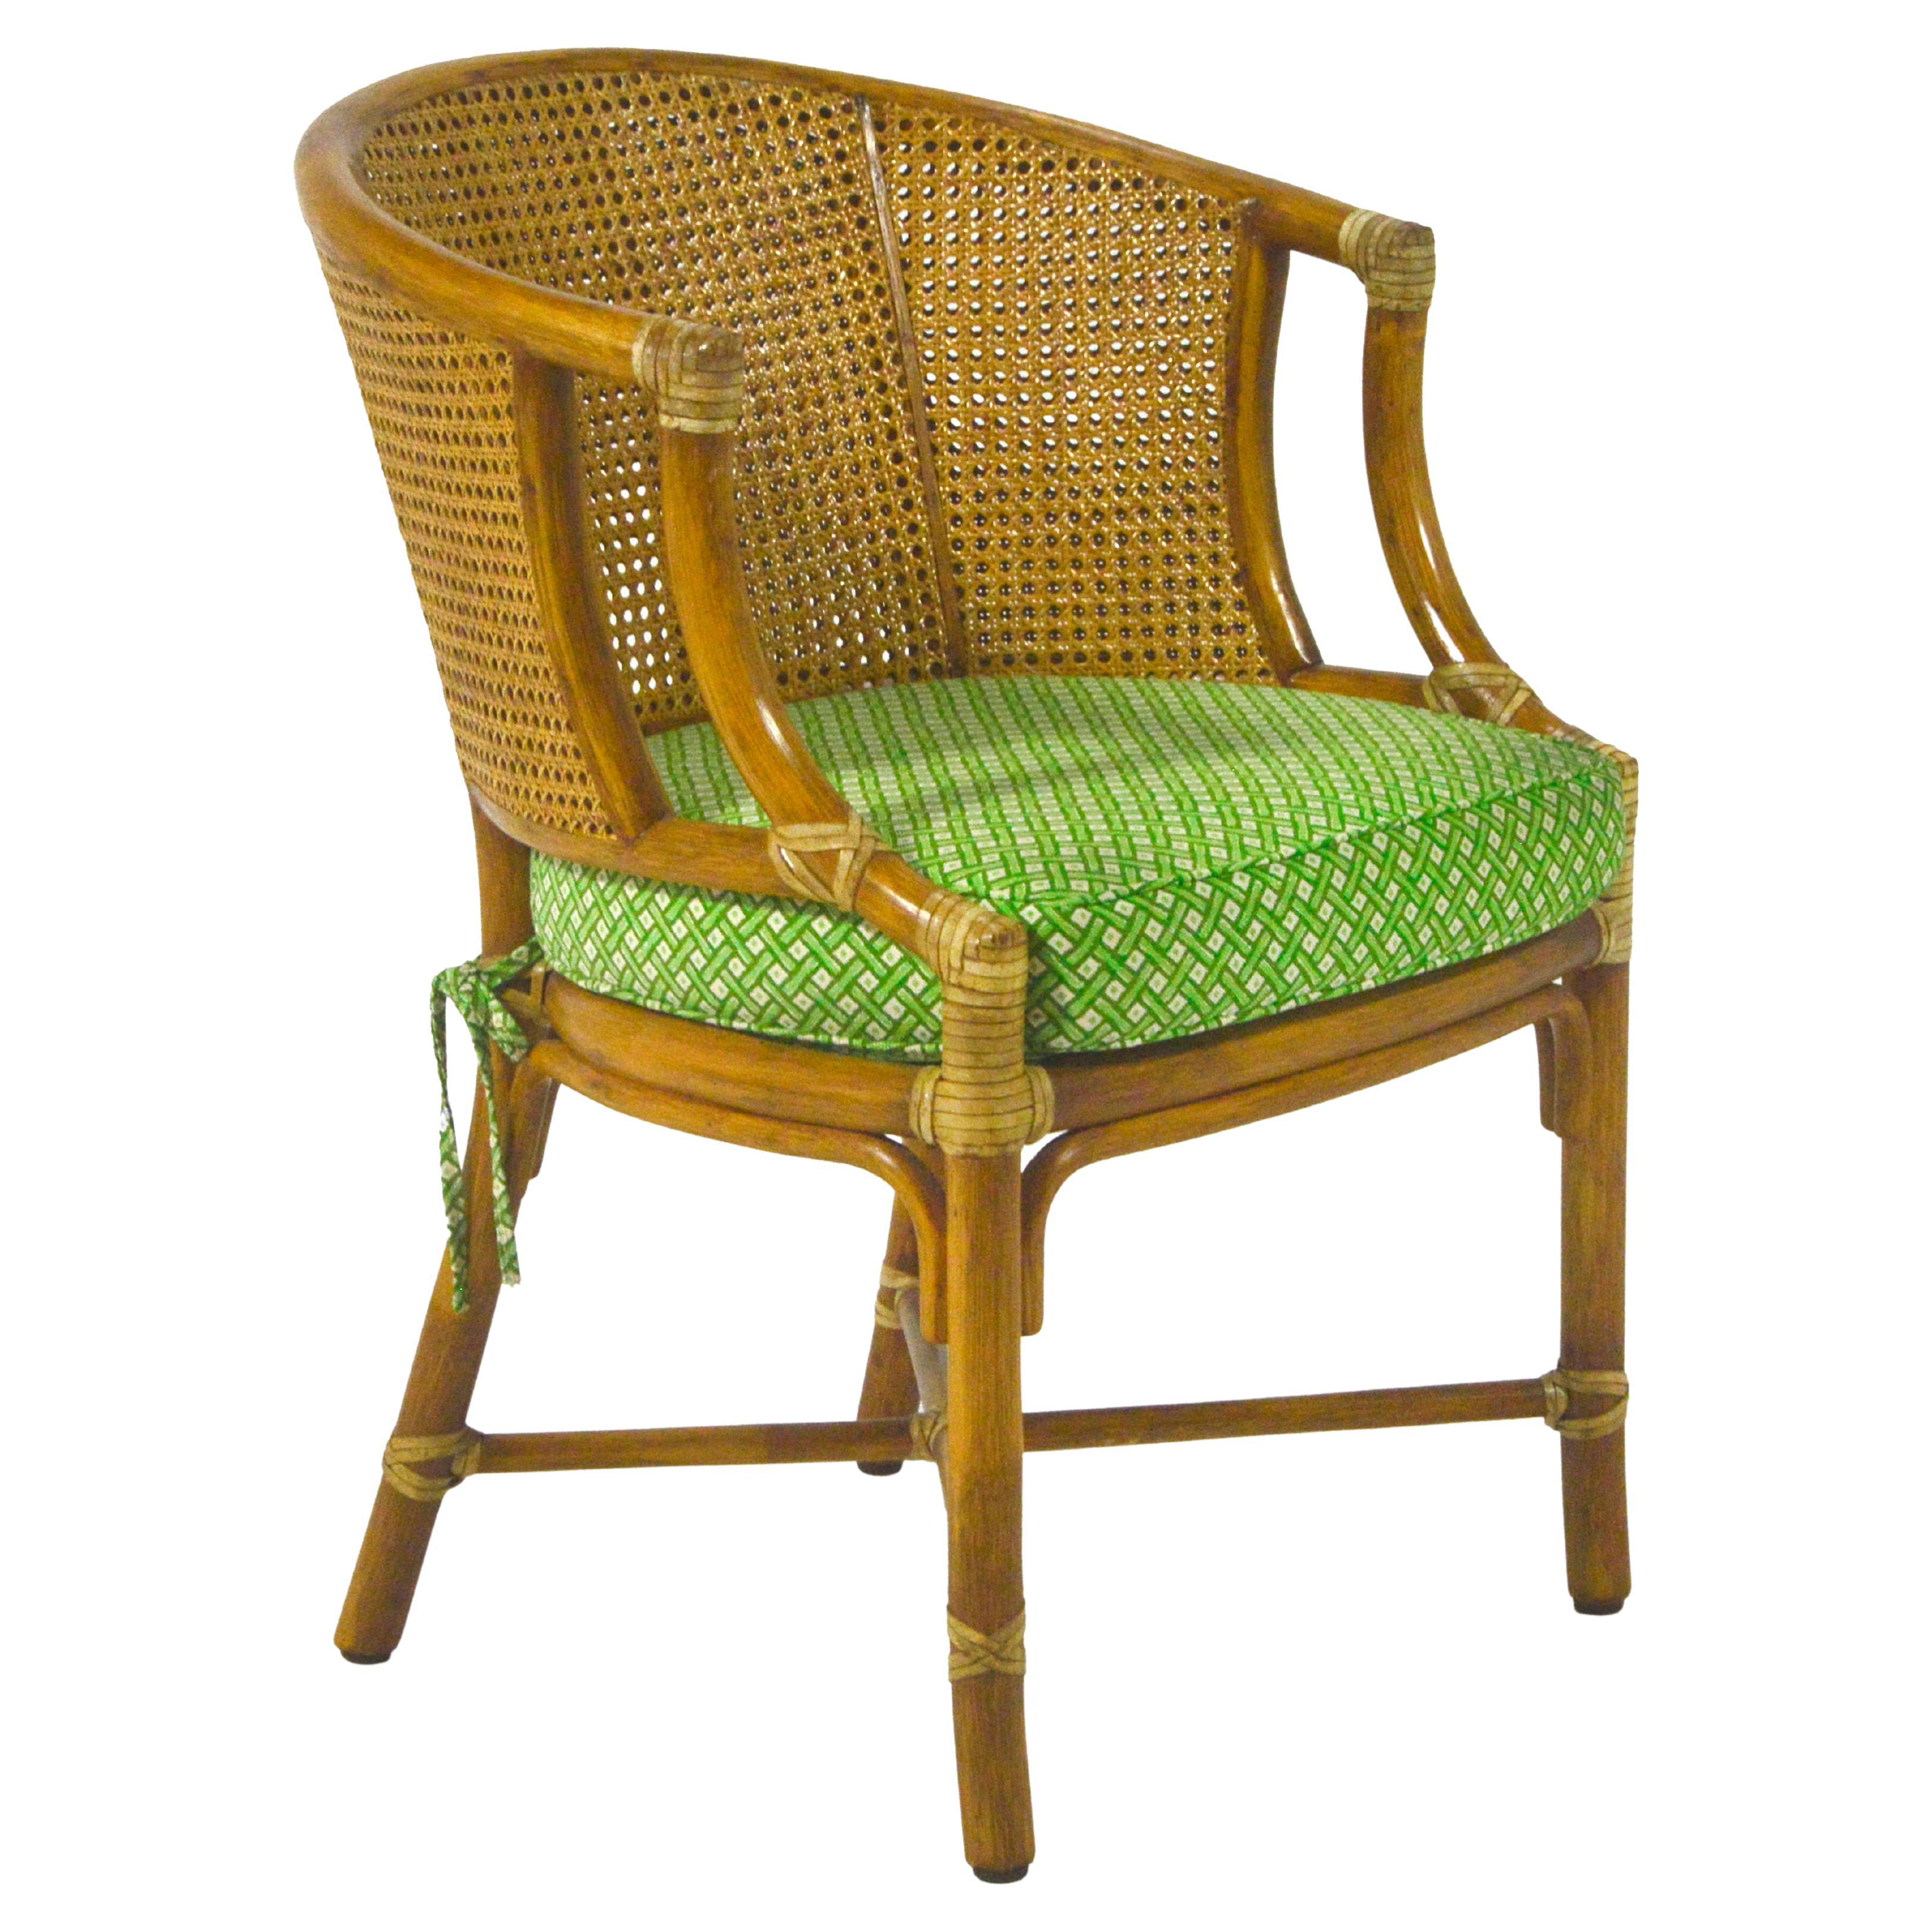 Elinor McGuire M-86 Rattan & Cane Chair For Sale 5